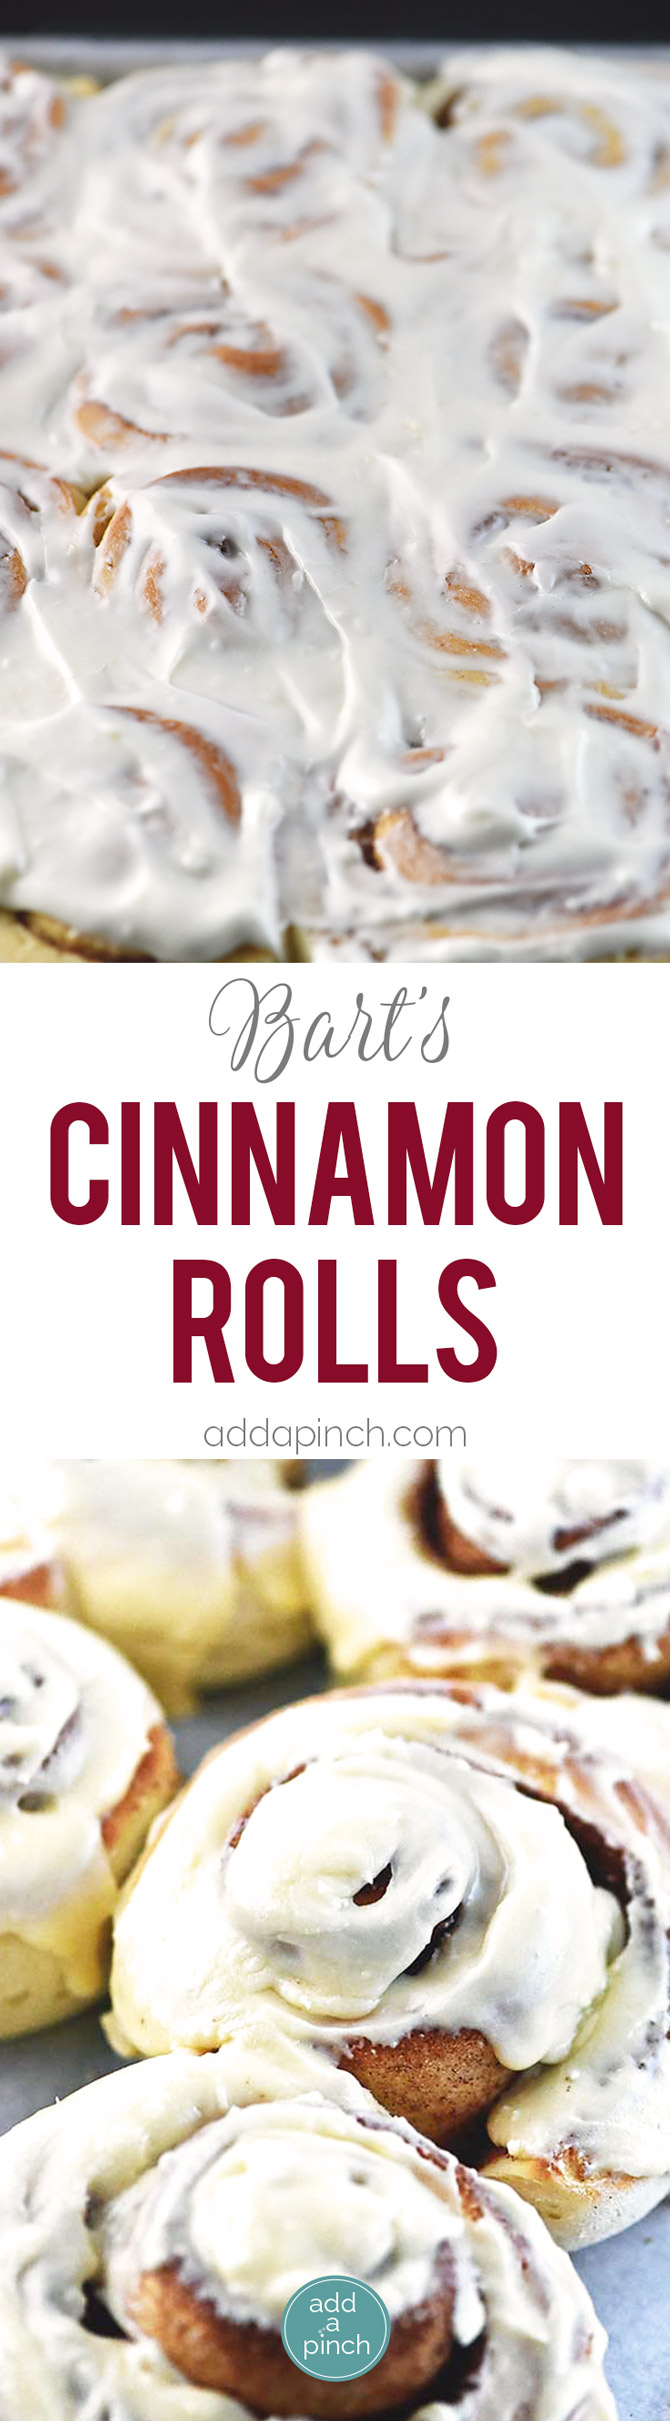 Bart's Cinnamon Rolls - This cinnamon roll recipe produces perfectly light and fluffy cinnamon rolls every time! So simple to make, this is a family favorite cinnamon roll! // addapinch.com